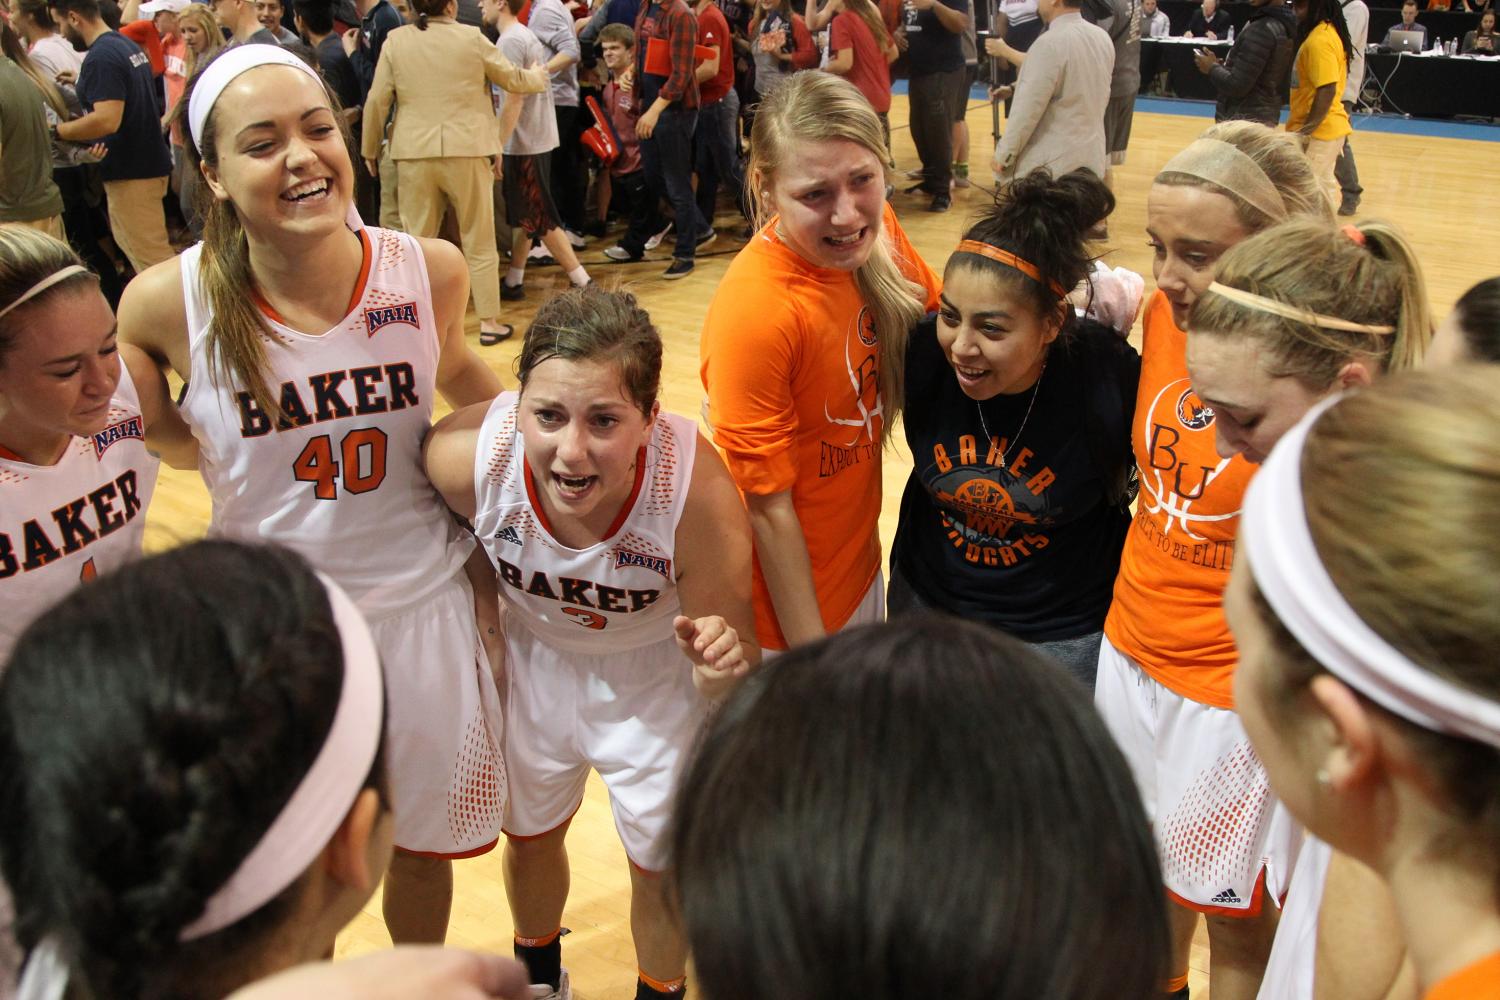 Senior Ericka Simpson gathers the team together one last time after a tough 49-35 loss to rival MNU in the NAIA title game on March 22, 2016, at the Silverstein Eye Centers Arena in Independence, Missouri. Following the women’s basketball team’s success all the way to the championship game was a fun ride, and it was unfortunate to see them fall one game short. However, when everyone rushed the court after the semifinals win against Benedictine to go to the title game, it was certainly a top Baker sports moment.